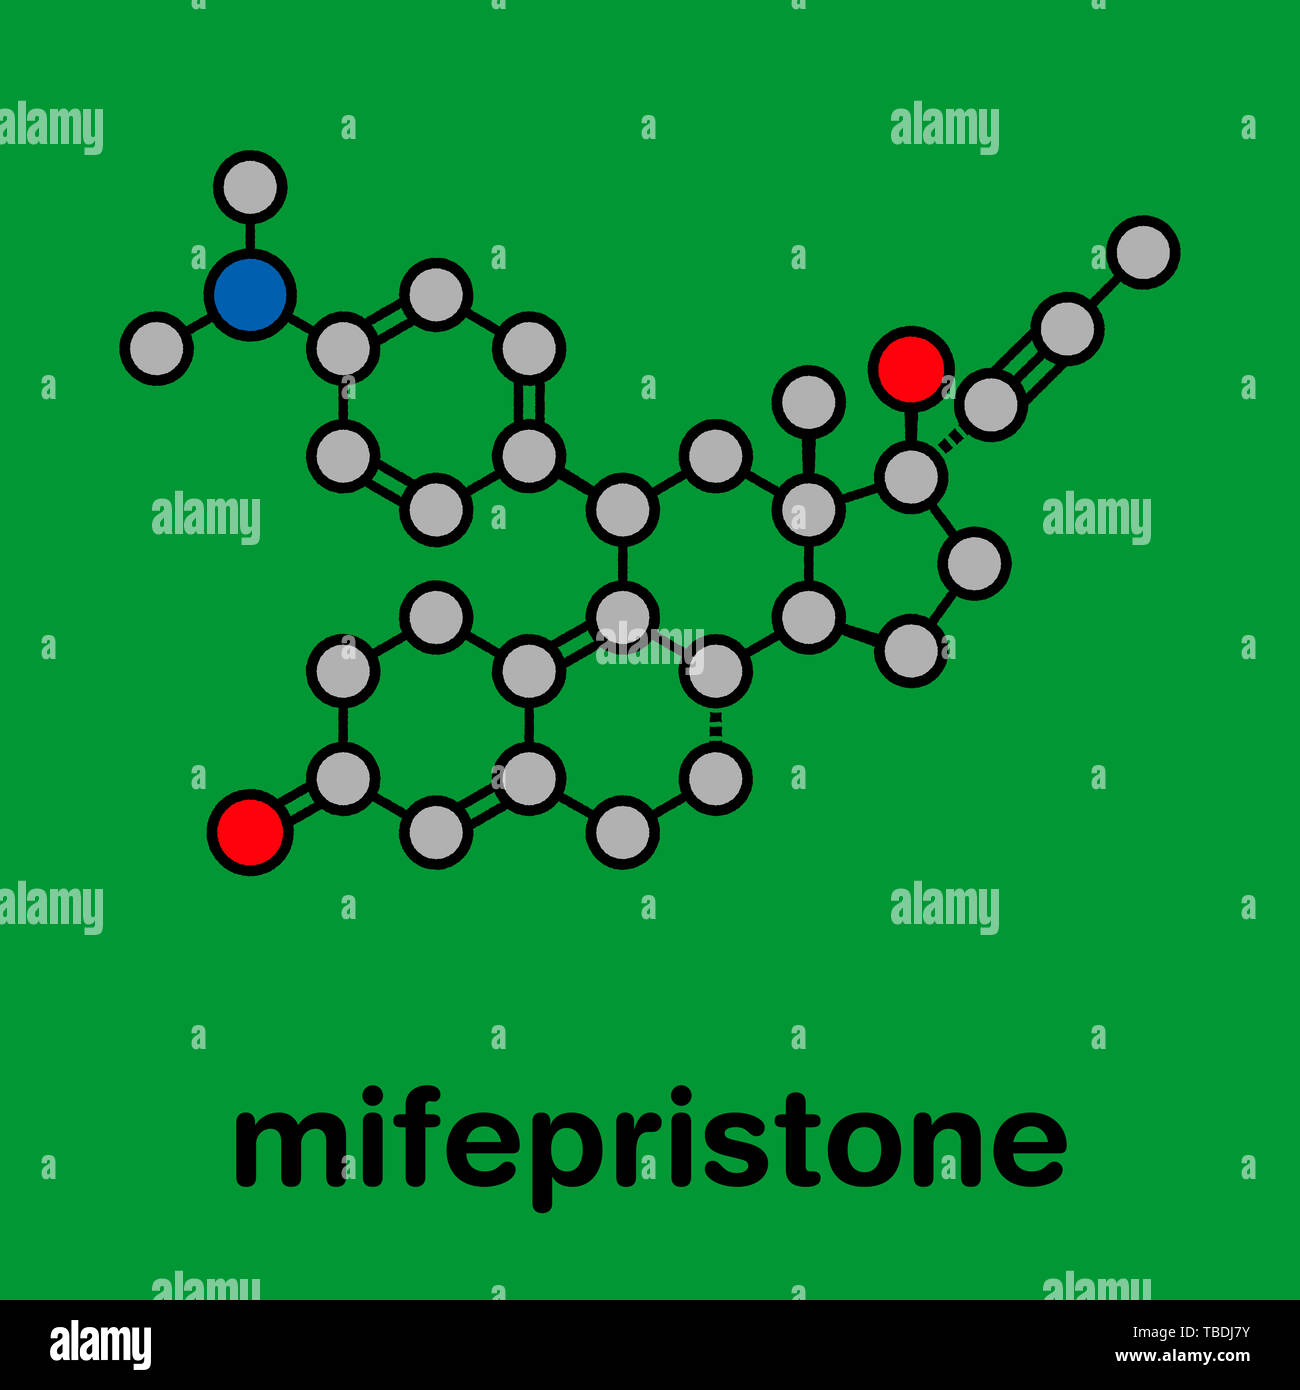 Mifepristone abortion-inducing drug molecule. Also used as emergency contraceptive agent. Stylized skeletal formula (chemical structure). Atoms are shown as color-coded circles with thick black outlines and bonds: hydrogen (hidden), carbon (grey), oxygen (red), nitrogen (blue) Stock Photo